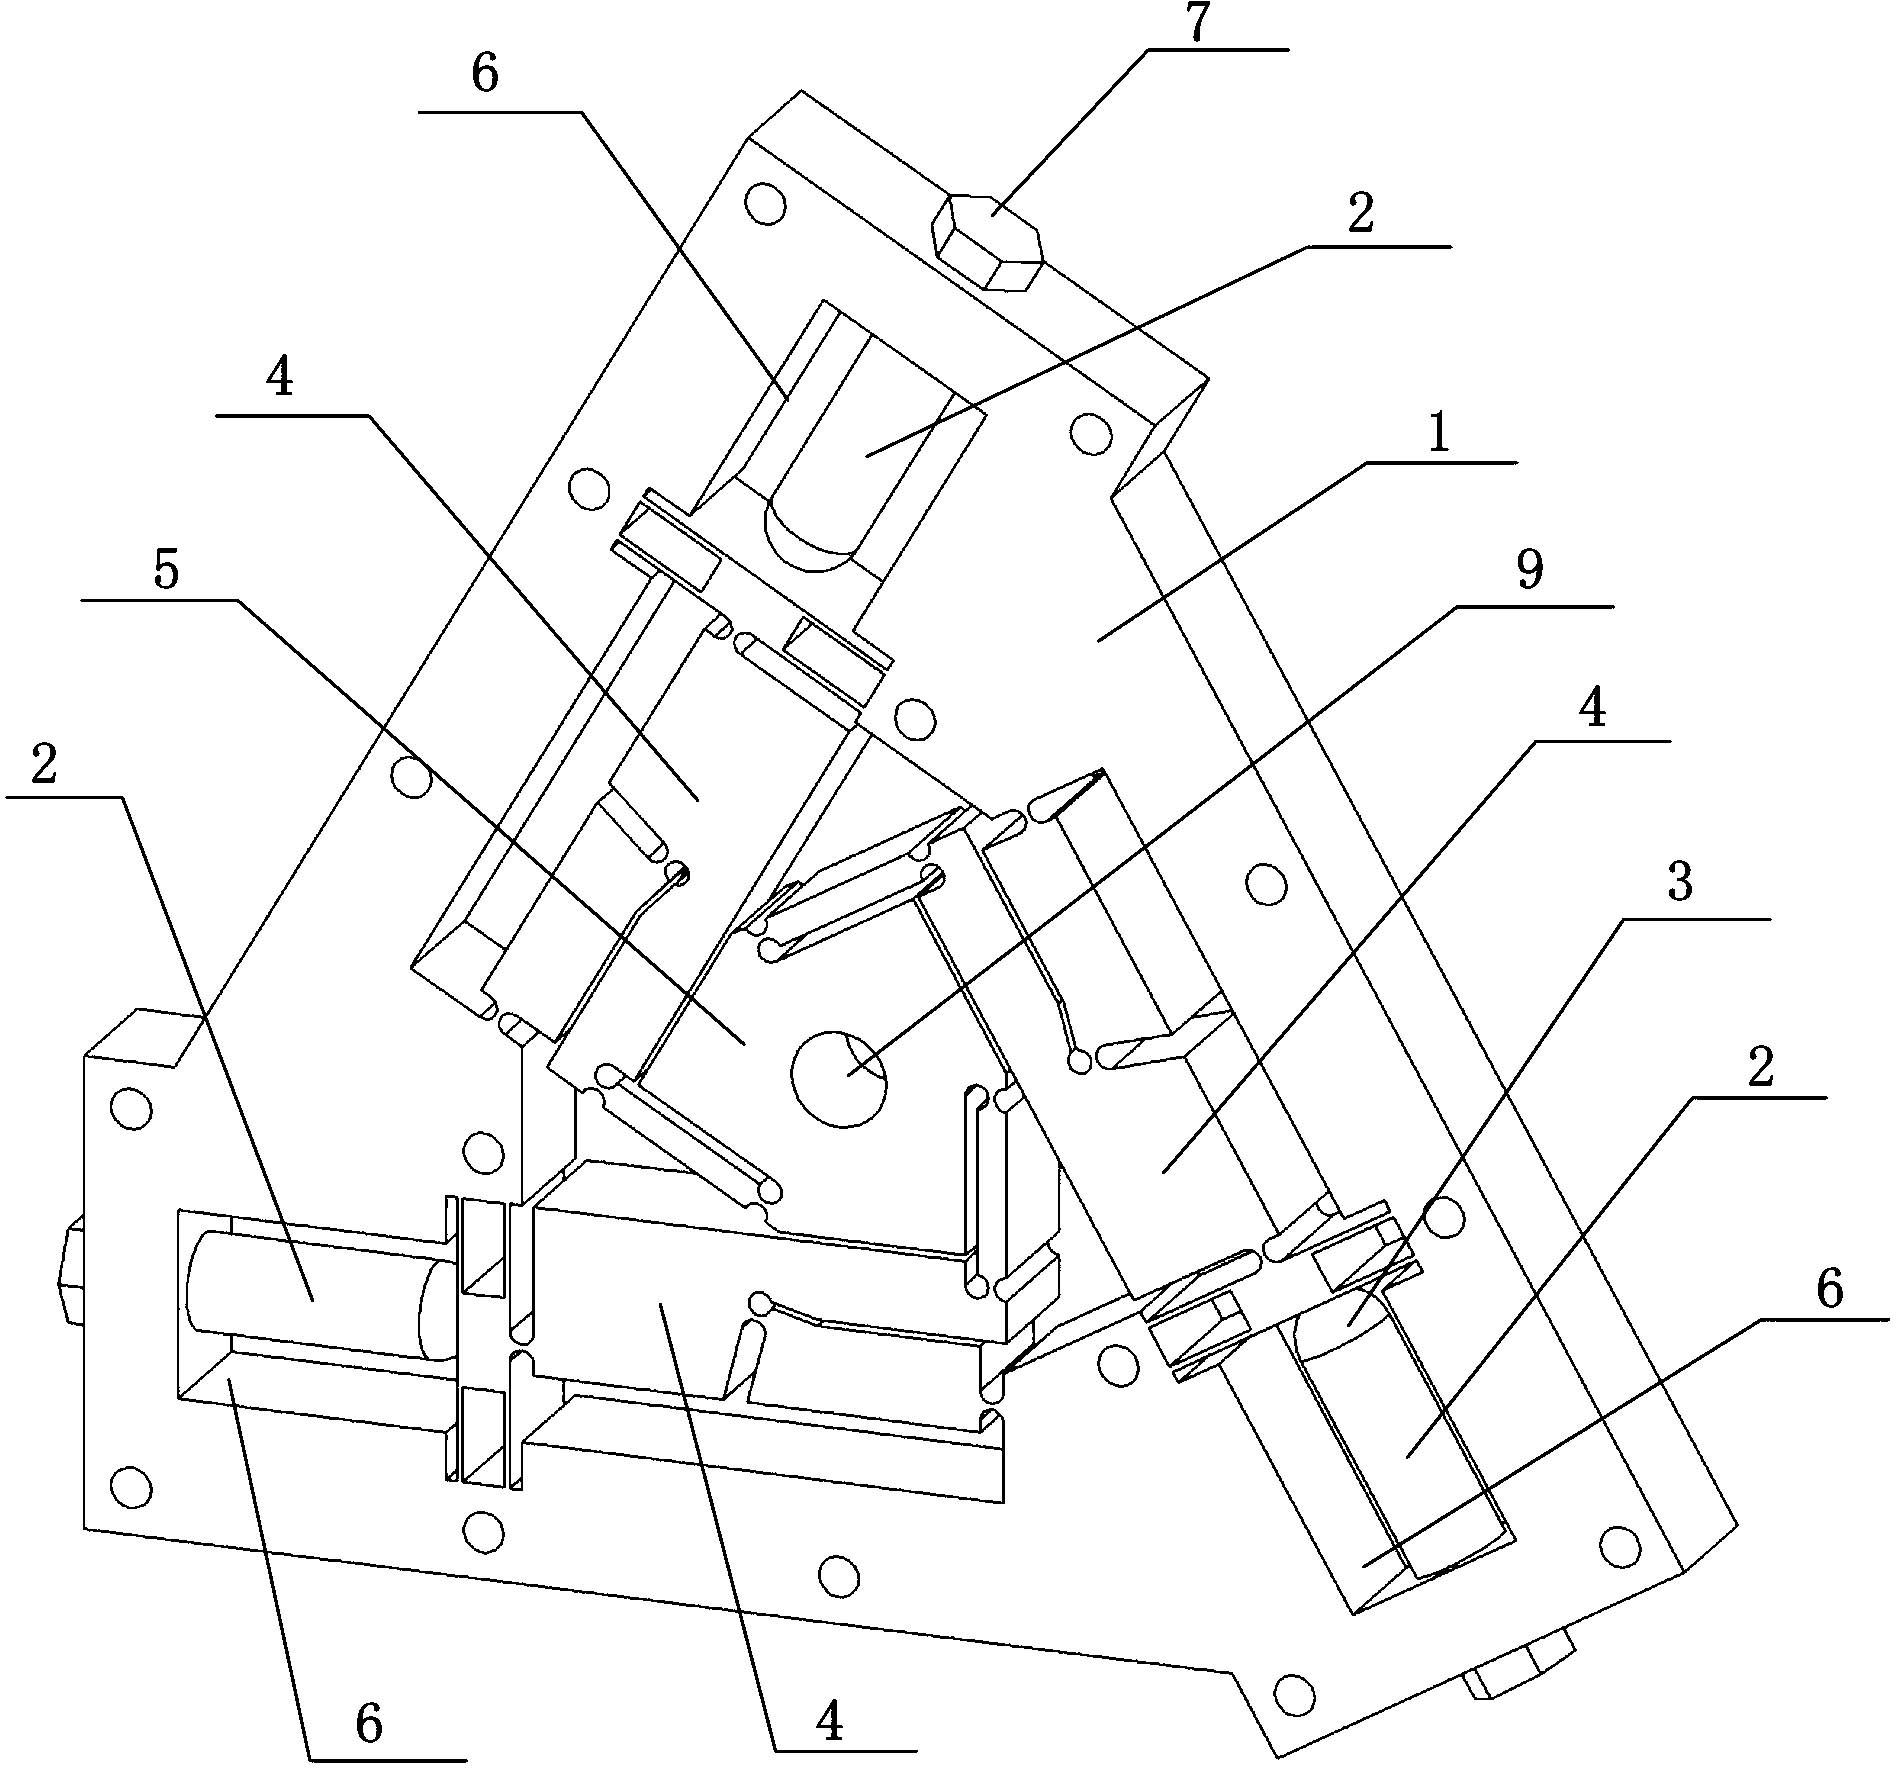 Plane parallel type three-freedom-degree precise positioning work table